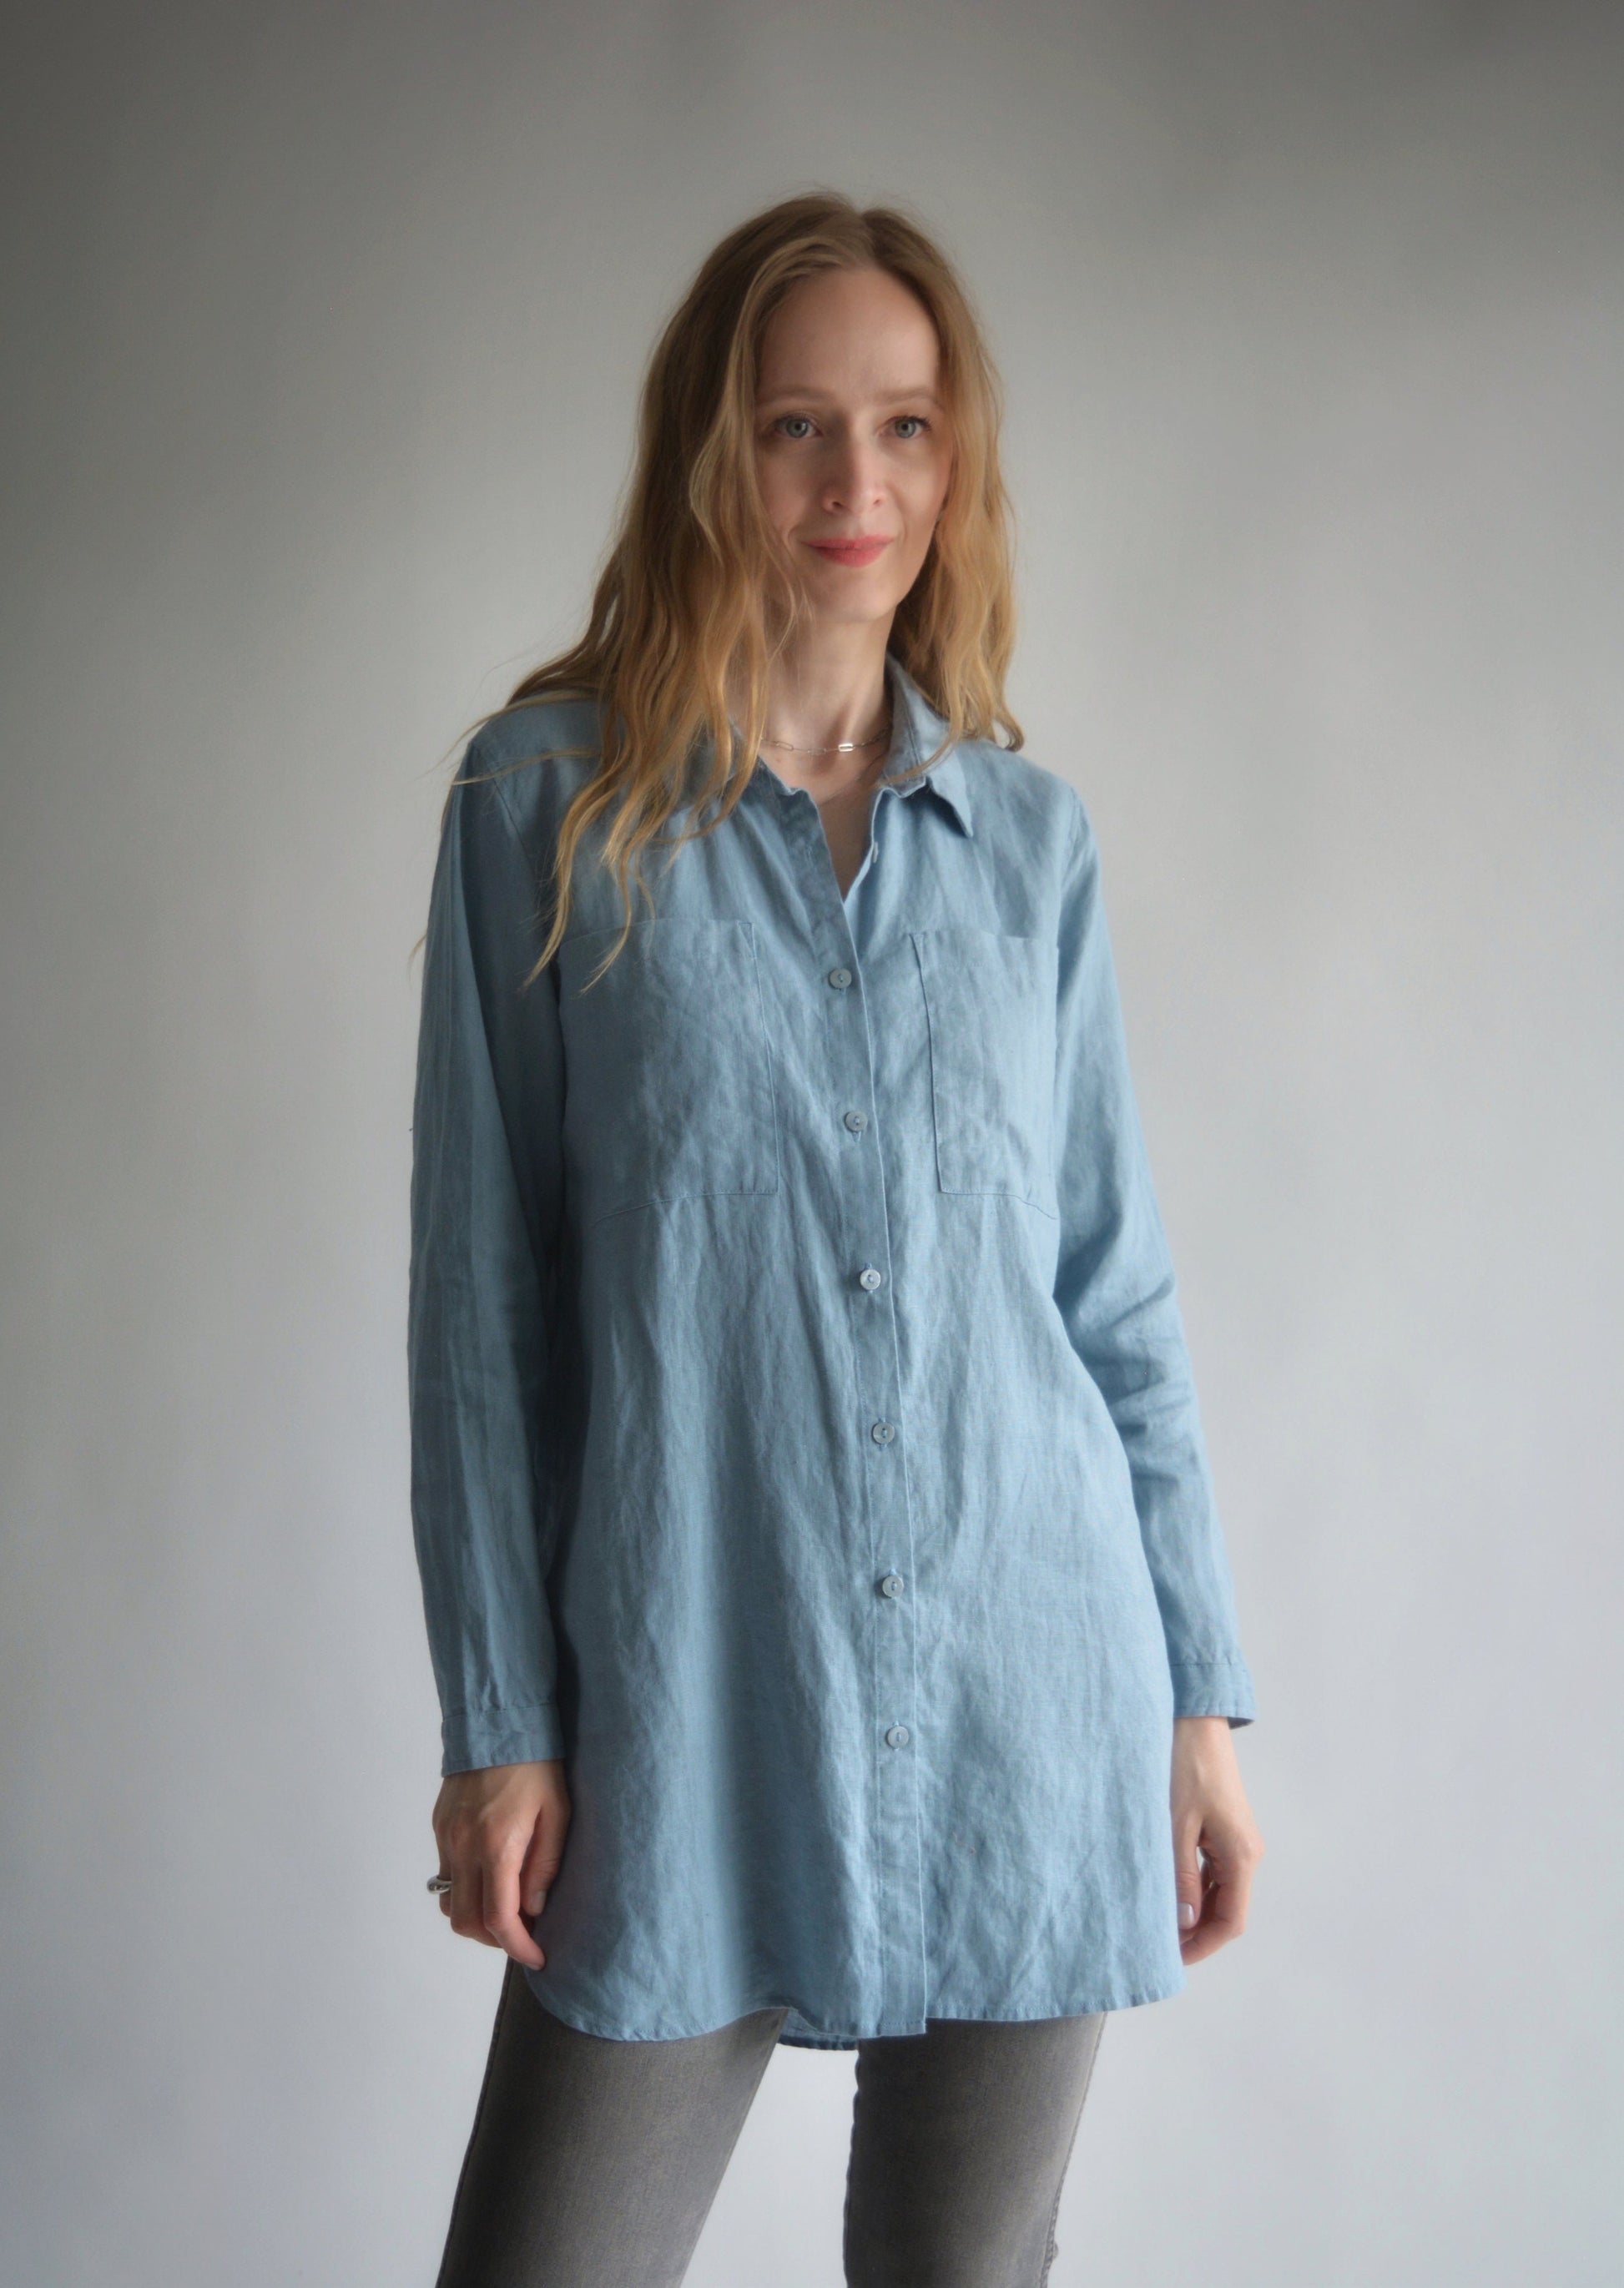 Linen Long Sleeve Shirt in Stone Blue color